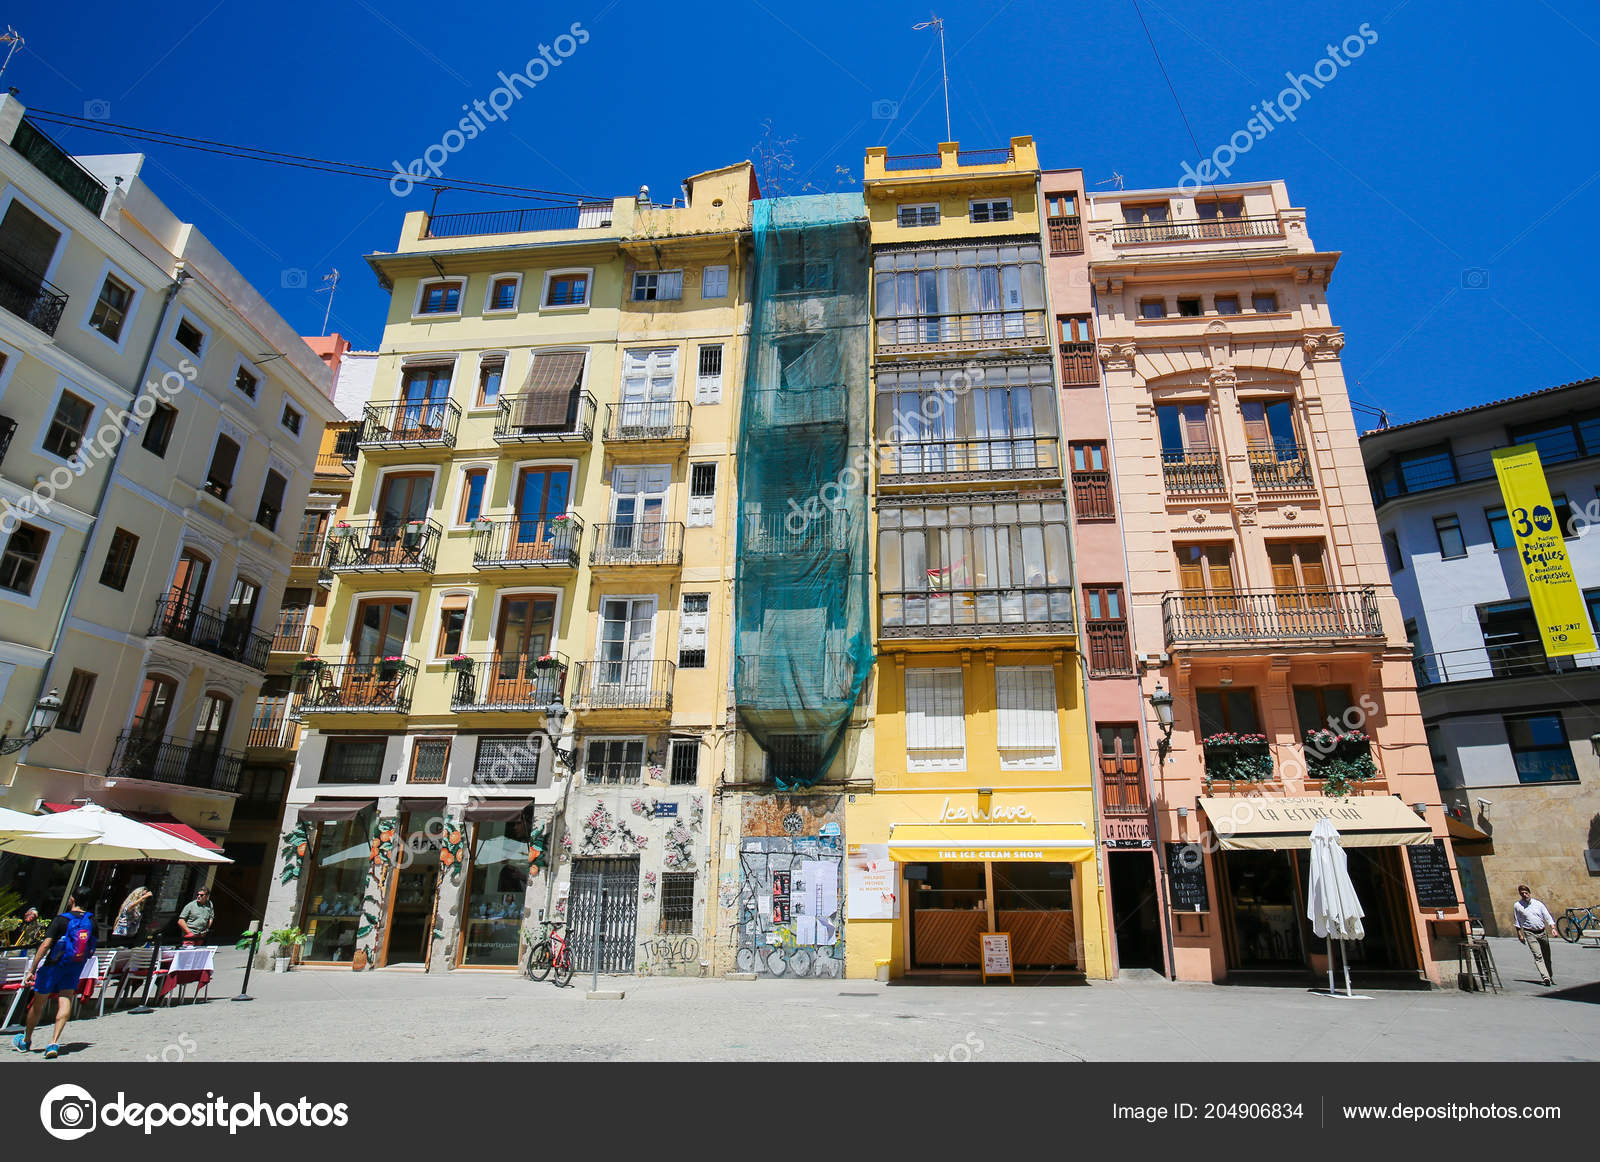 Valencia Spain June 2018 Typical Colorful Buildings Plaza Lope